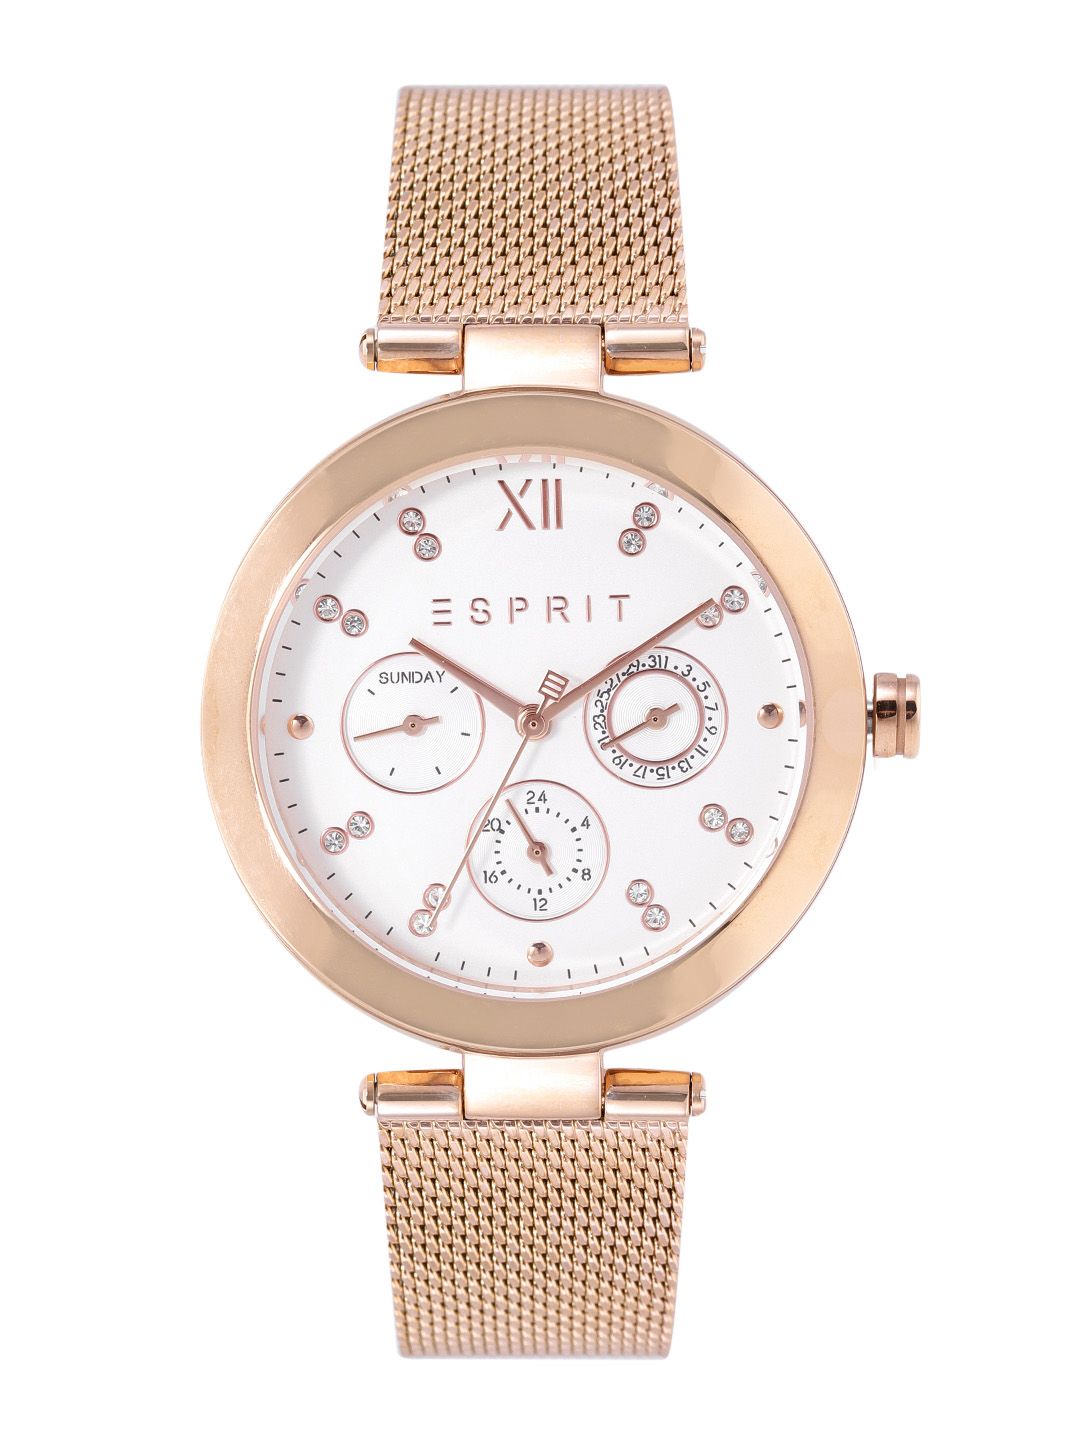 ESPRIT Women White Dial & Rose Gold Toned Bracelet Straps Analogue Watch ES1L213M0075 Price in India